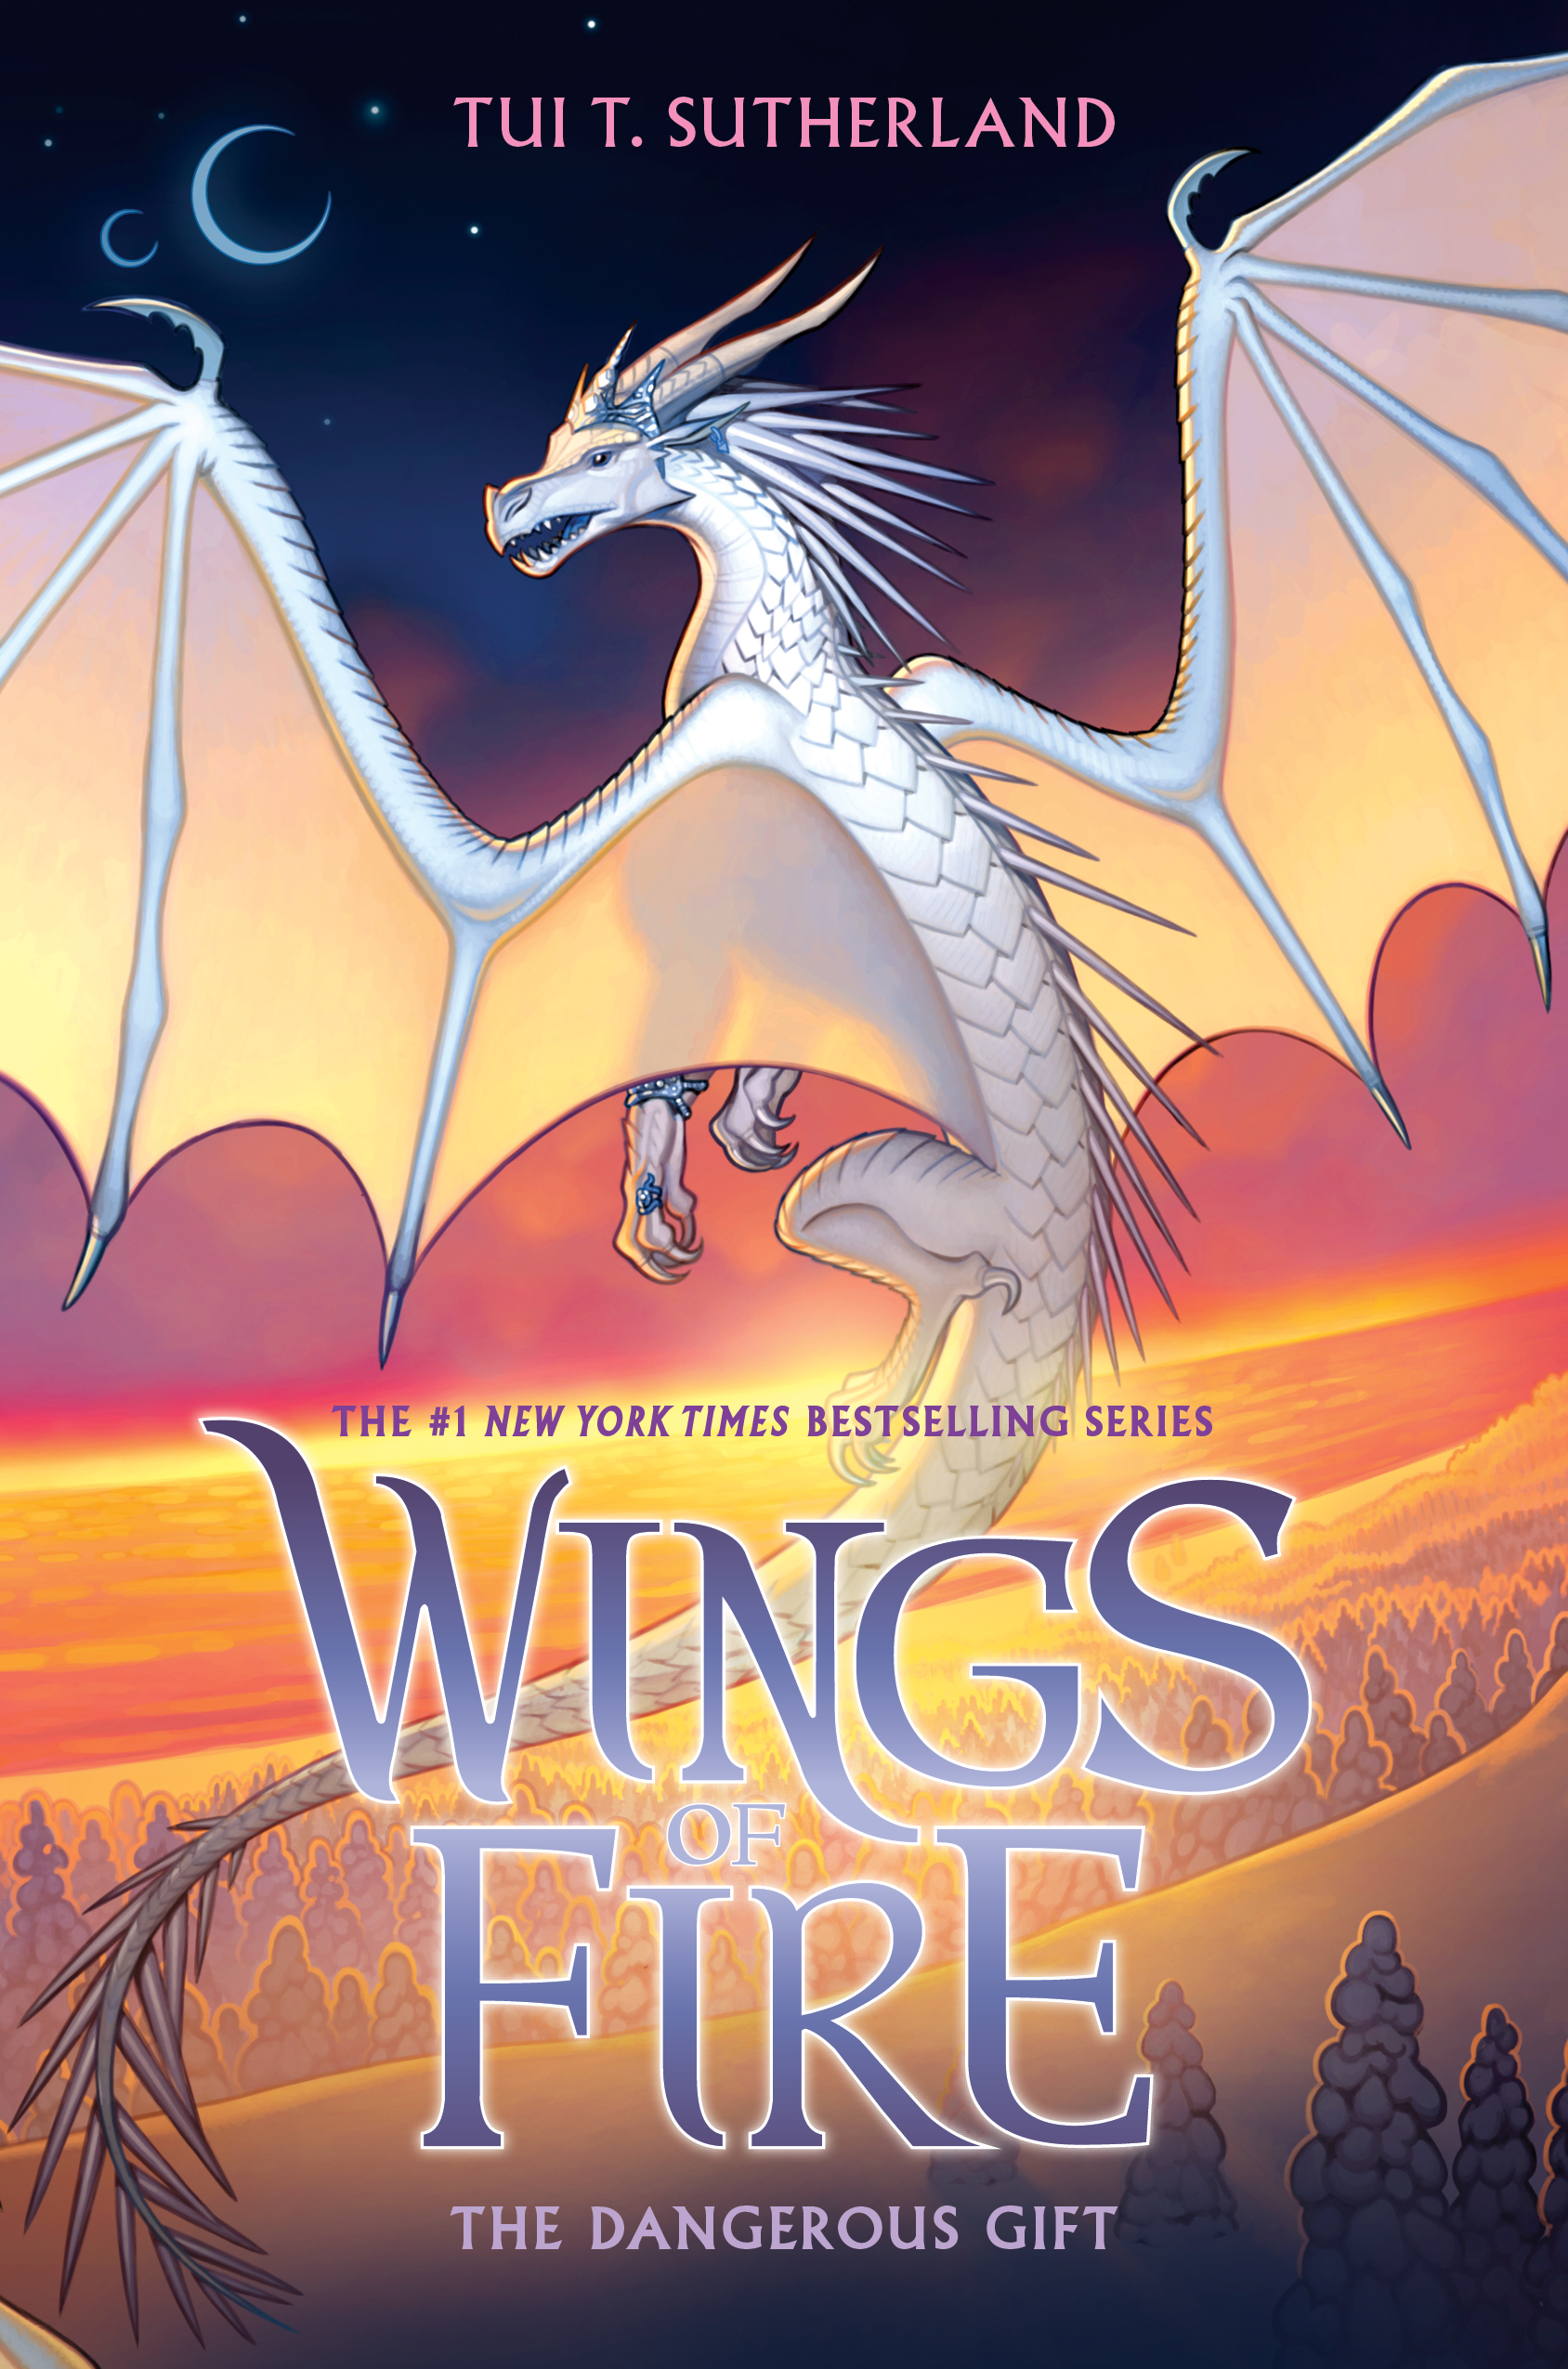 The Dangerous Gift (Wings of Fire, #14)